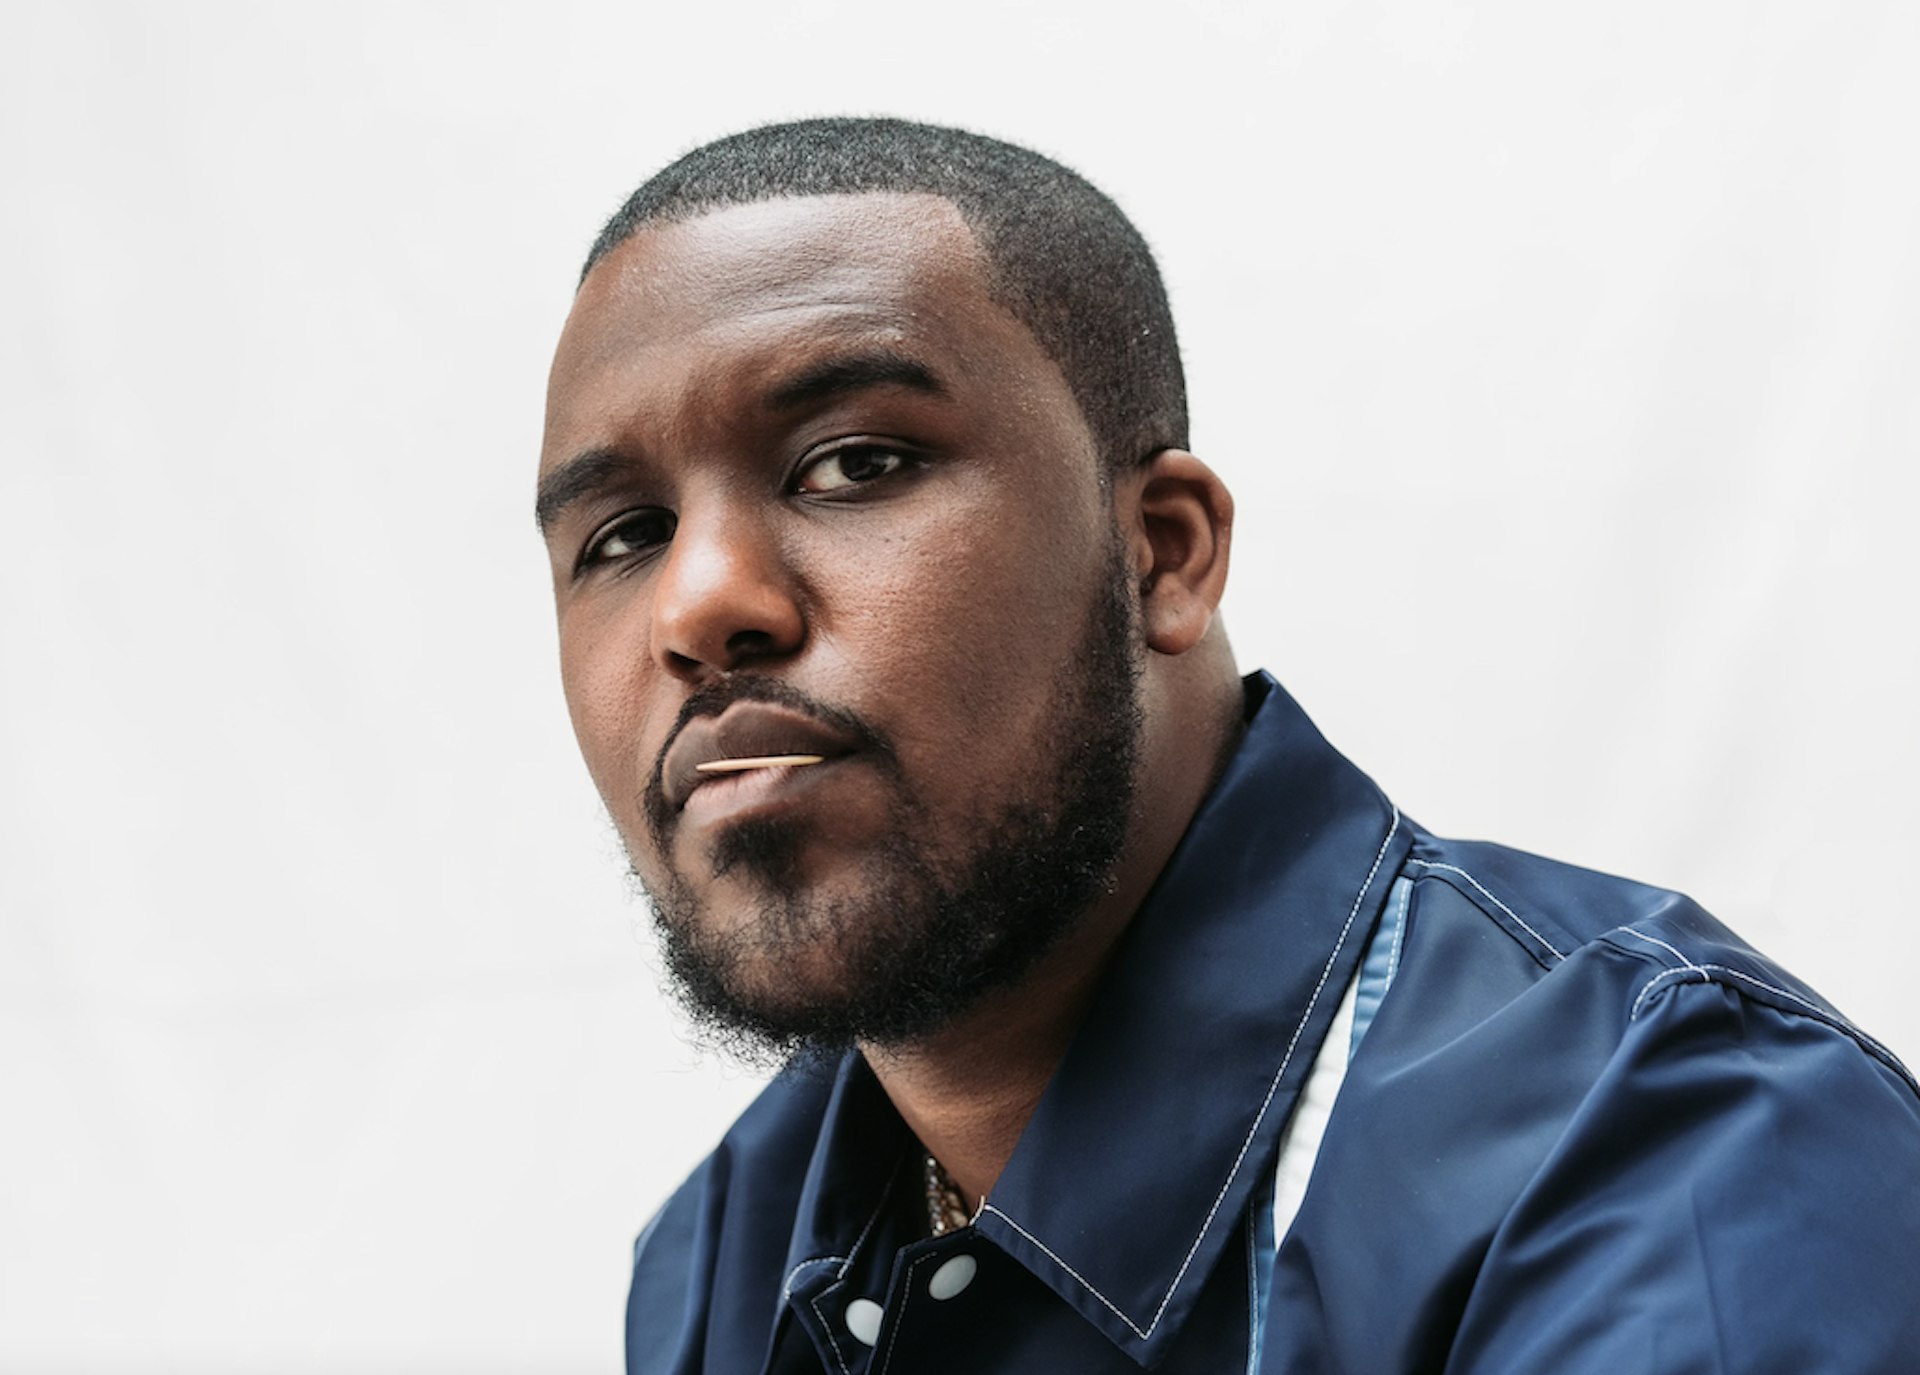 ‘If grime is dead, I’m not a casualty:’ Novelist in conversation